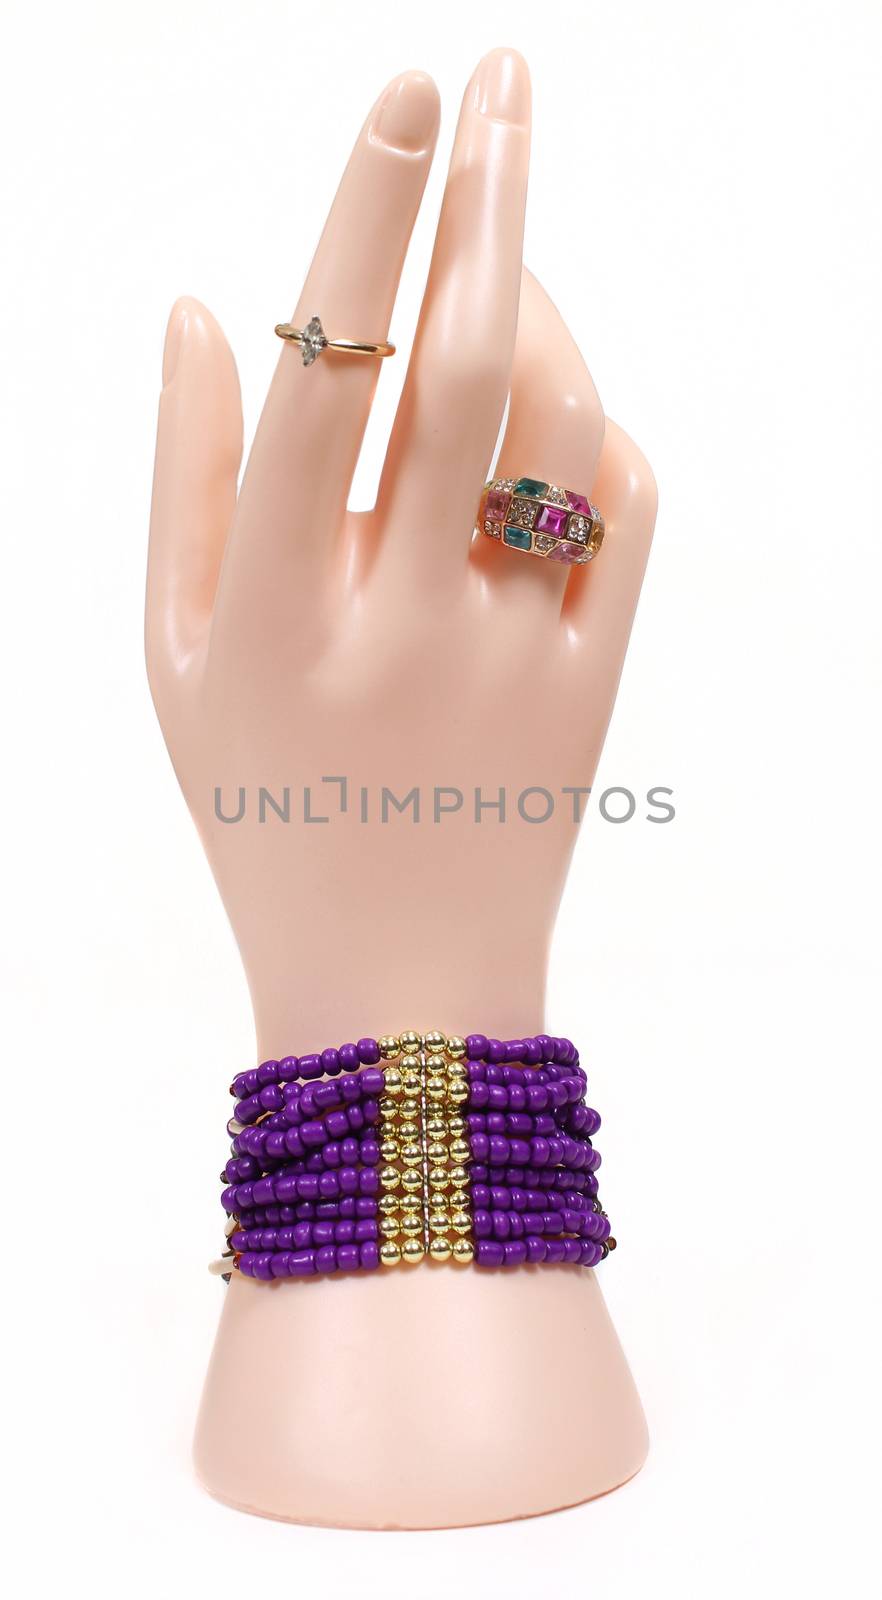 Jewelry on Mannequin Hand, Rings and Bracelet